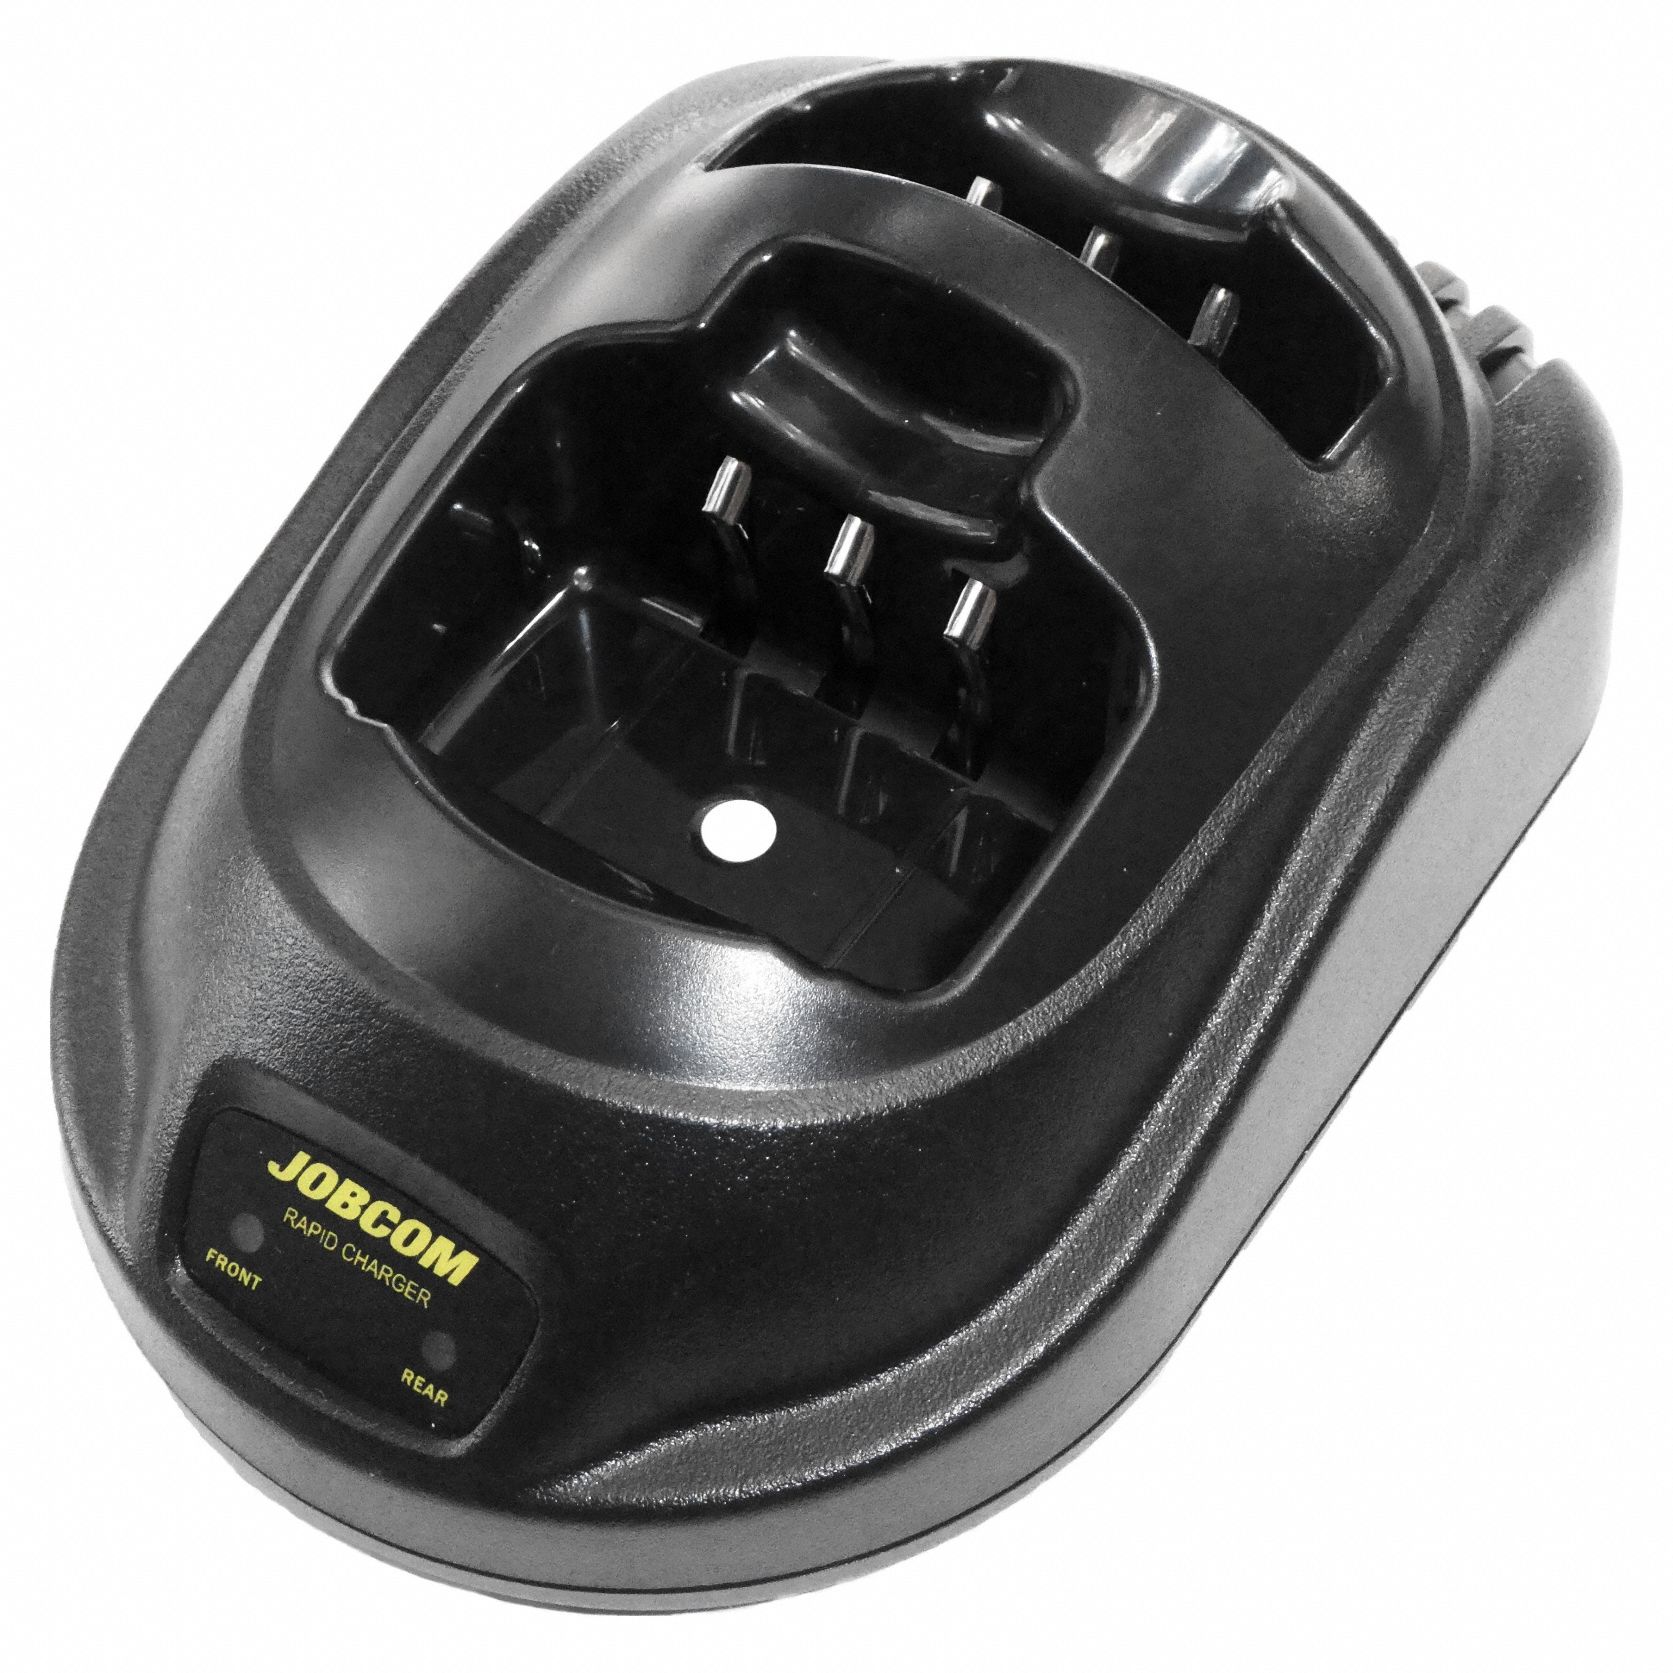 Single Unit Charger: Fits Ritron, For Jobcom J Series, 1 Radios Charged, 110 V AC, BC-JX